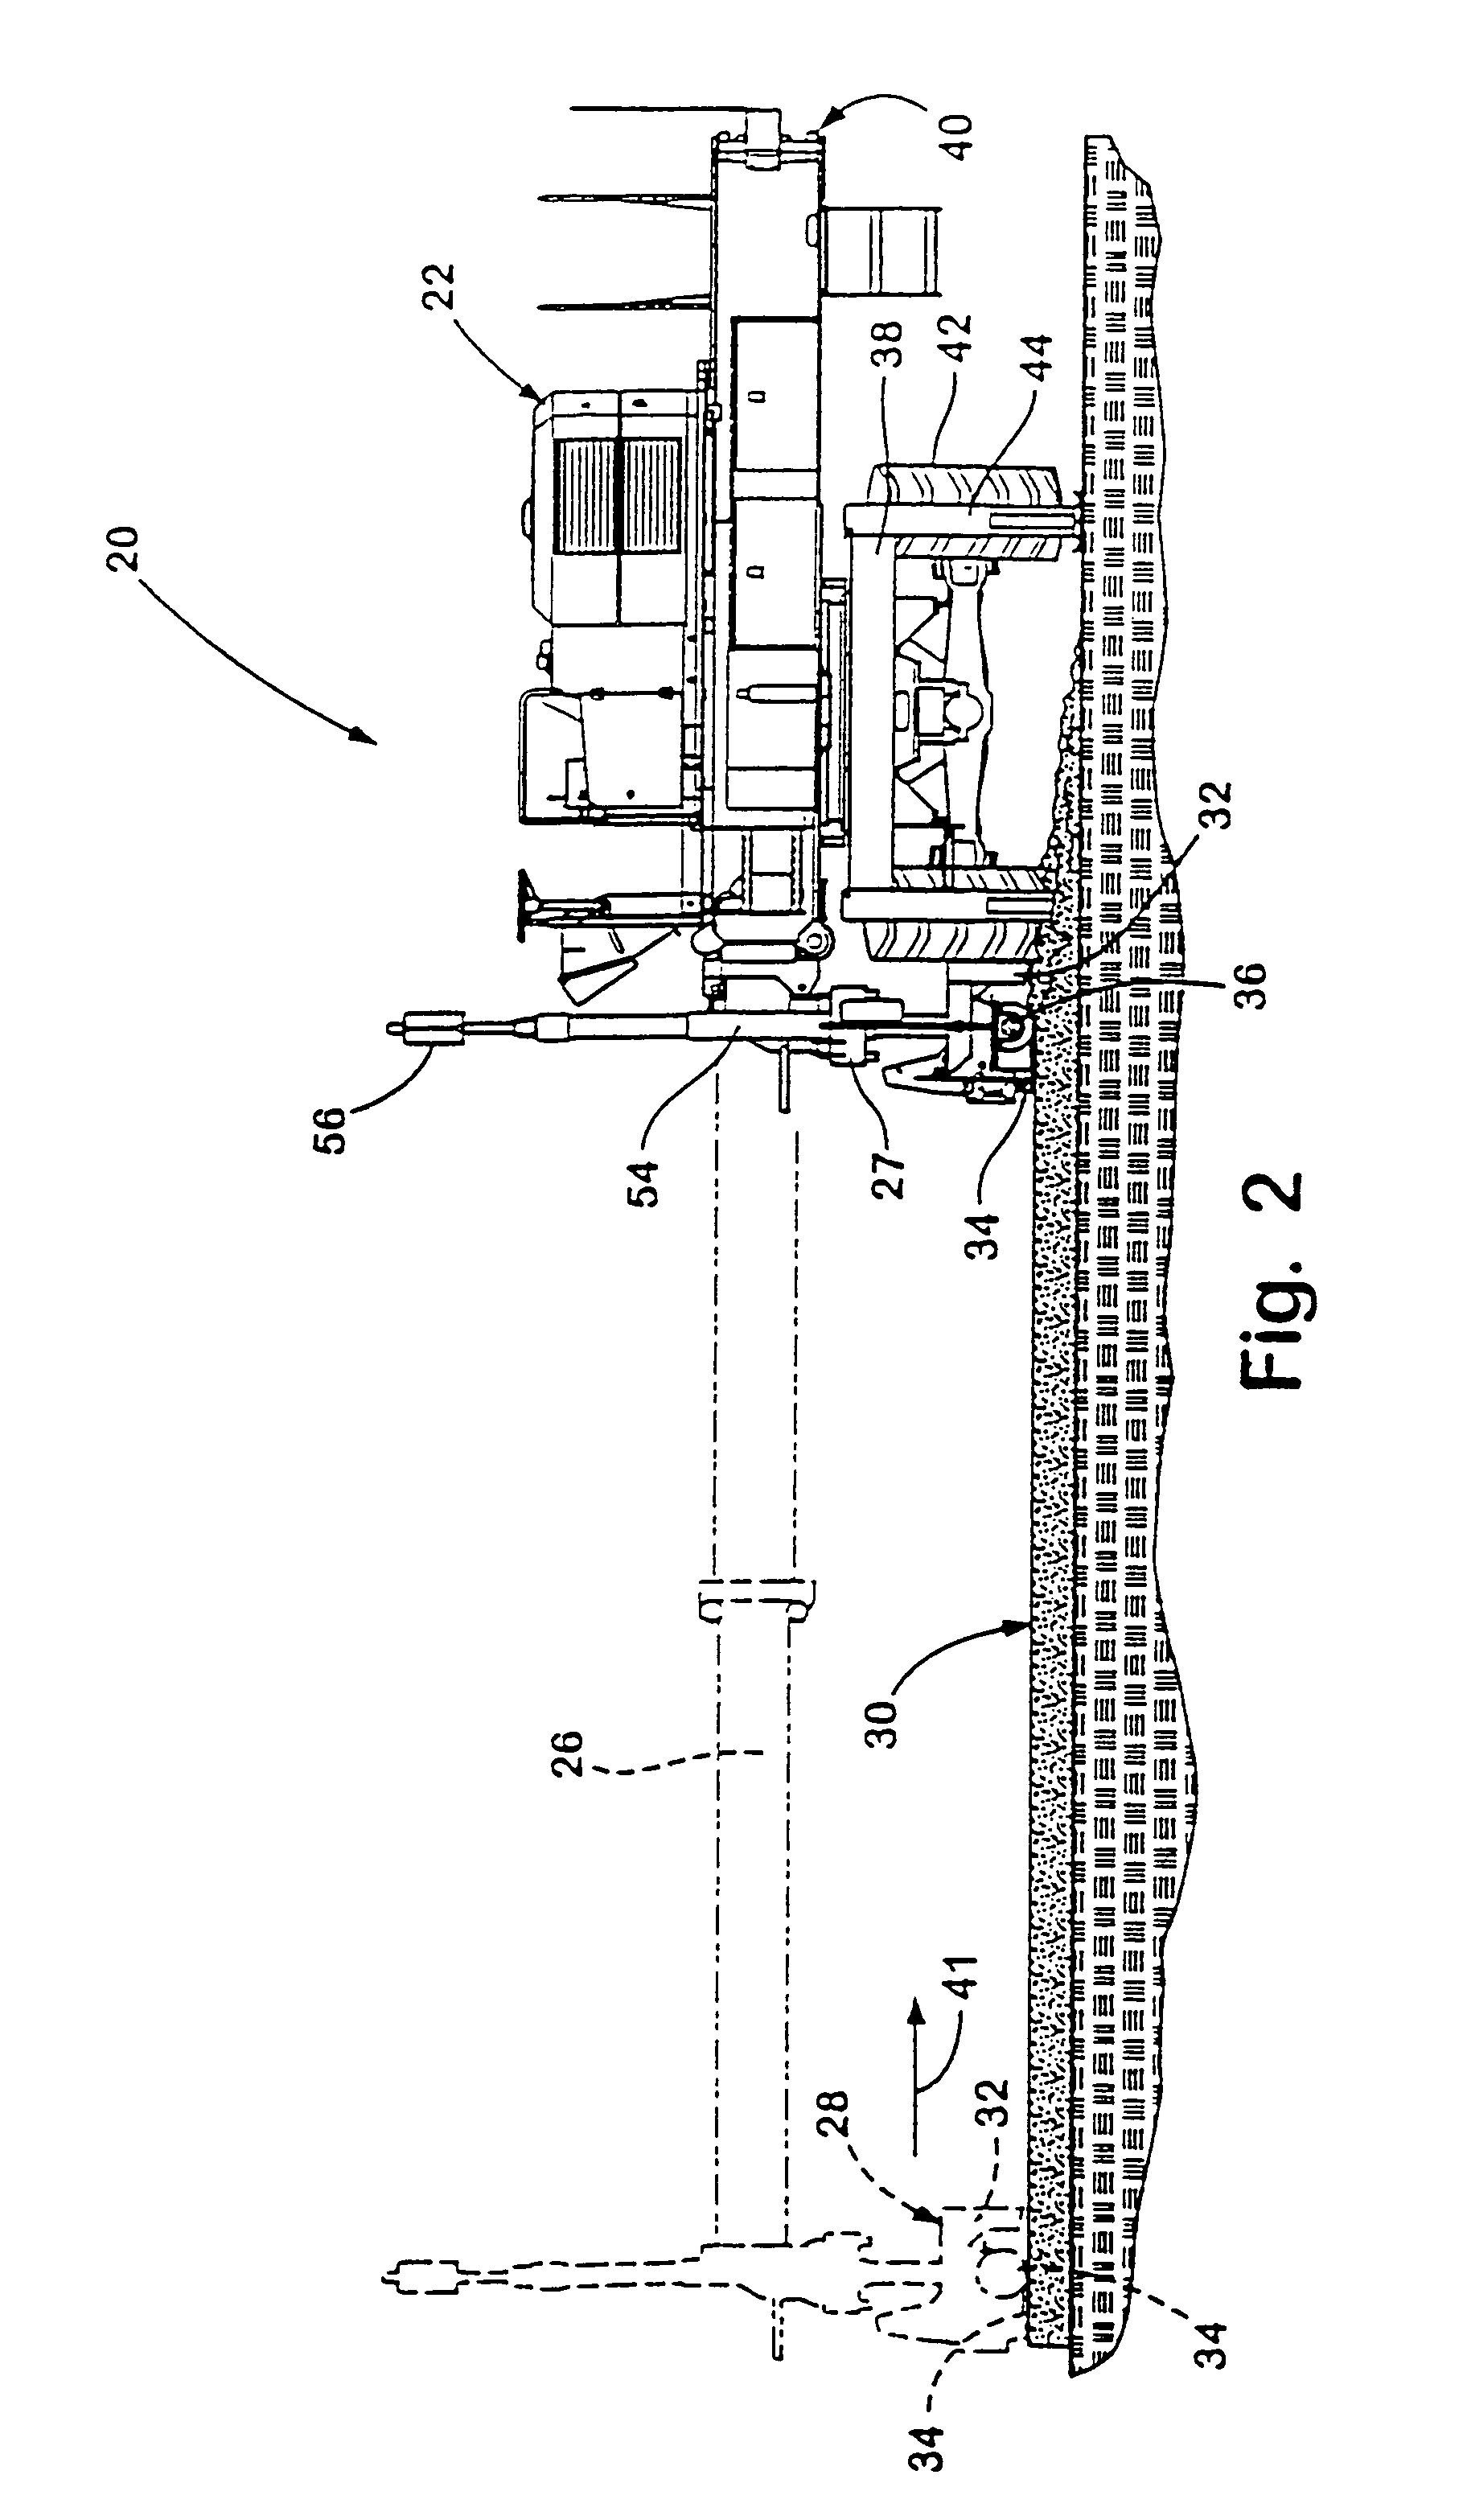 Apparatus and method for three-dimensional contouring